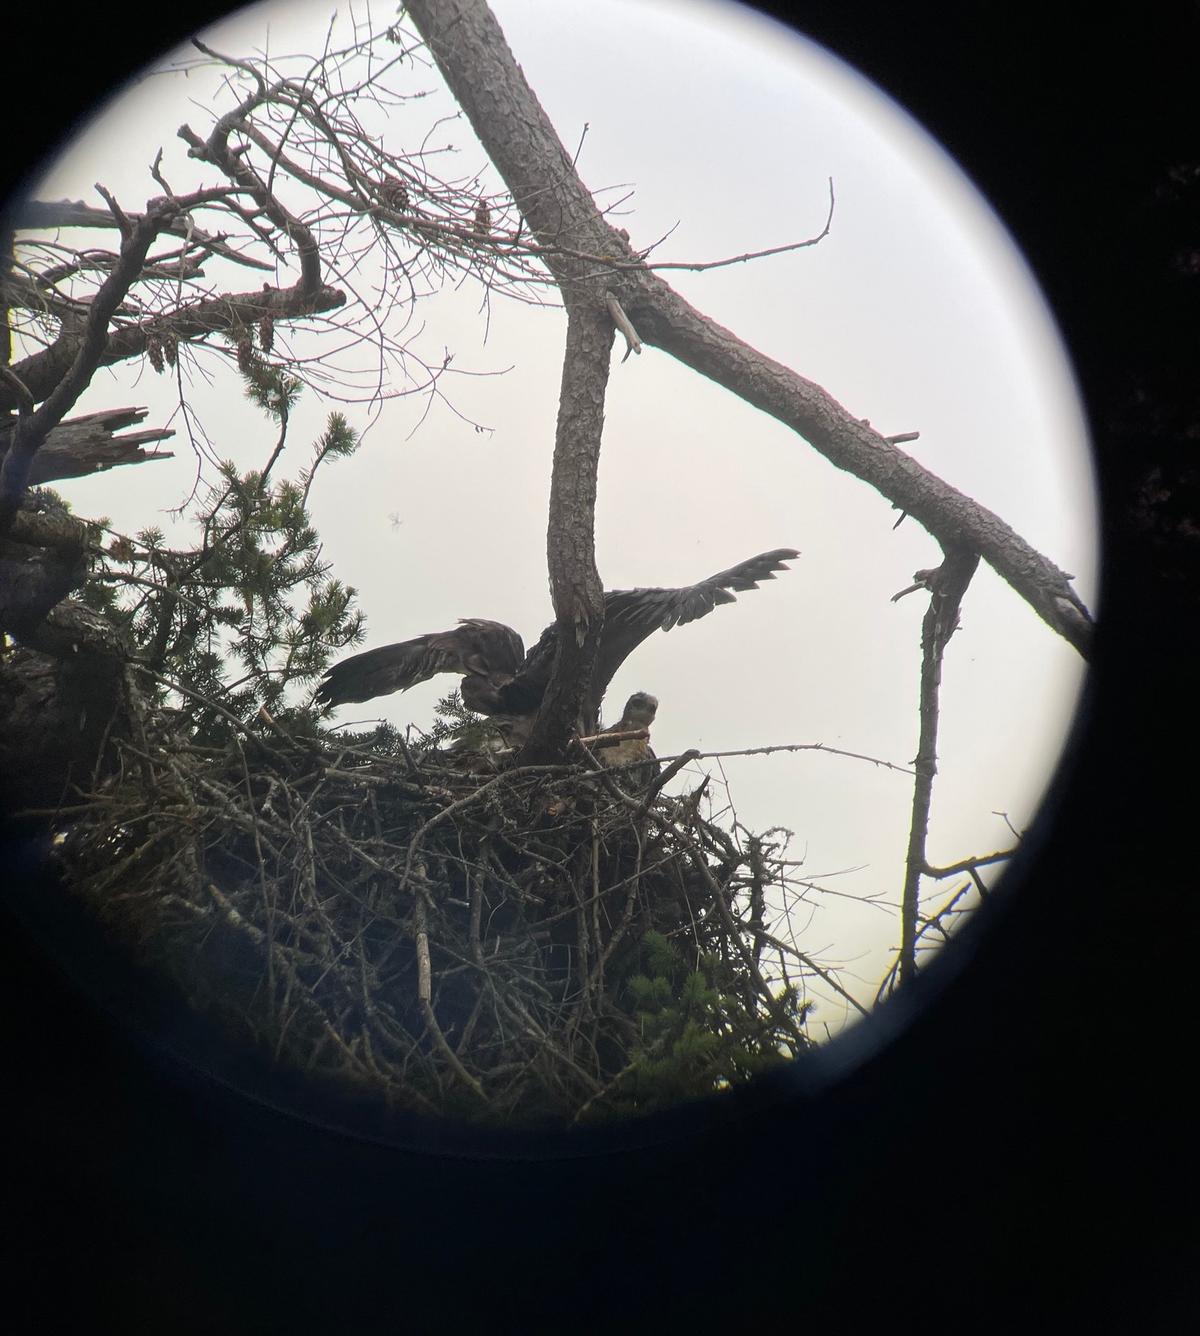 The eaglet stretches its wings while biding the day with its red-tailed hawklet sibling. (Courtesy of <a href="https://www.facebook.com/GROWLSOFGABRIOLA/">Pam McCartney, Growls</a>)